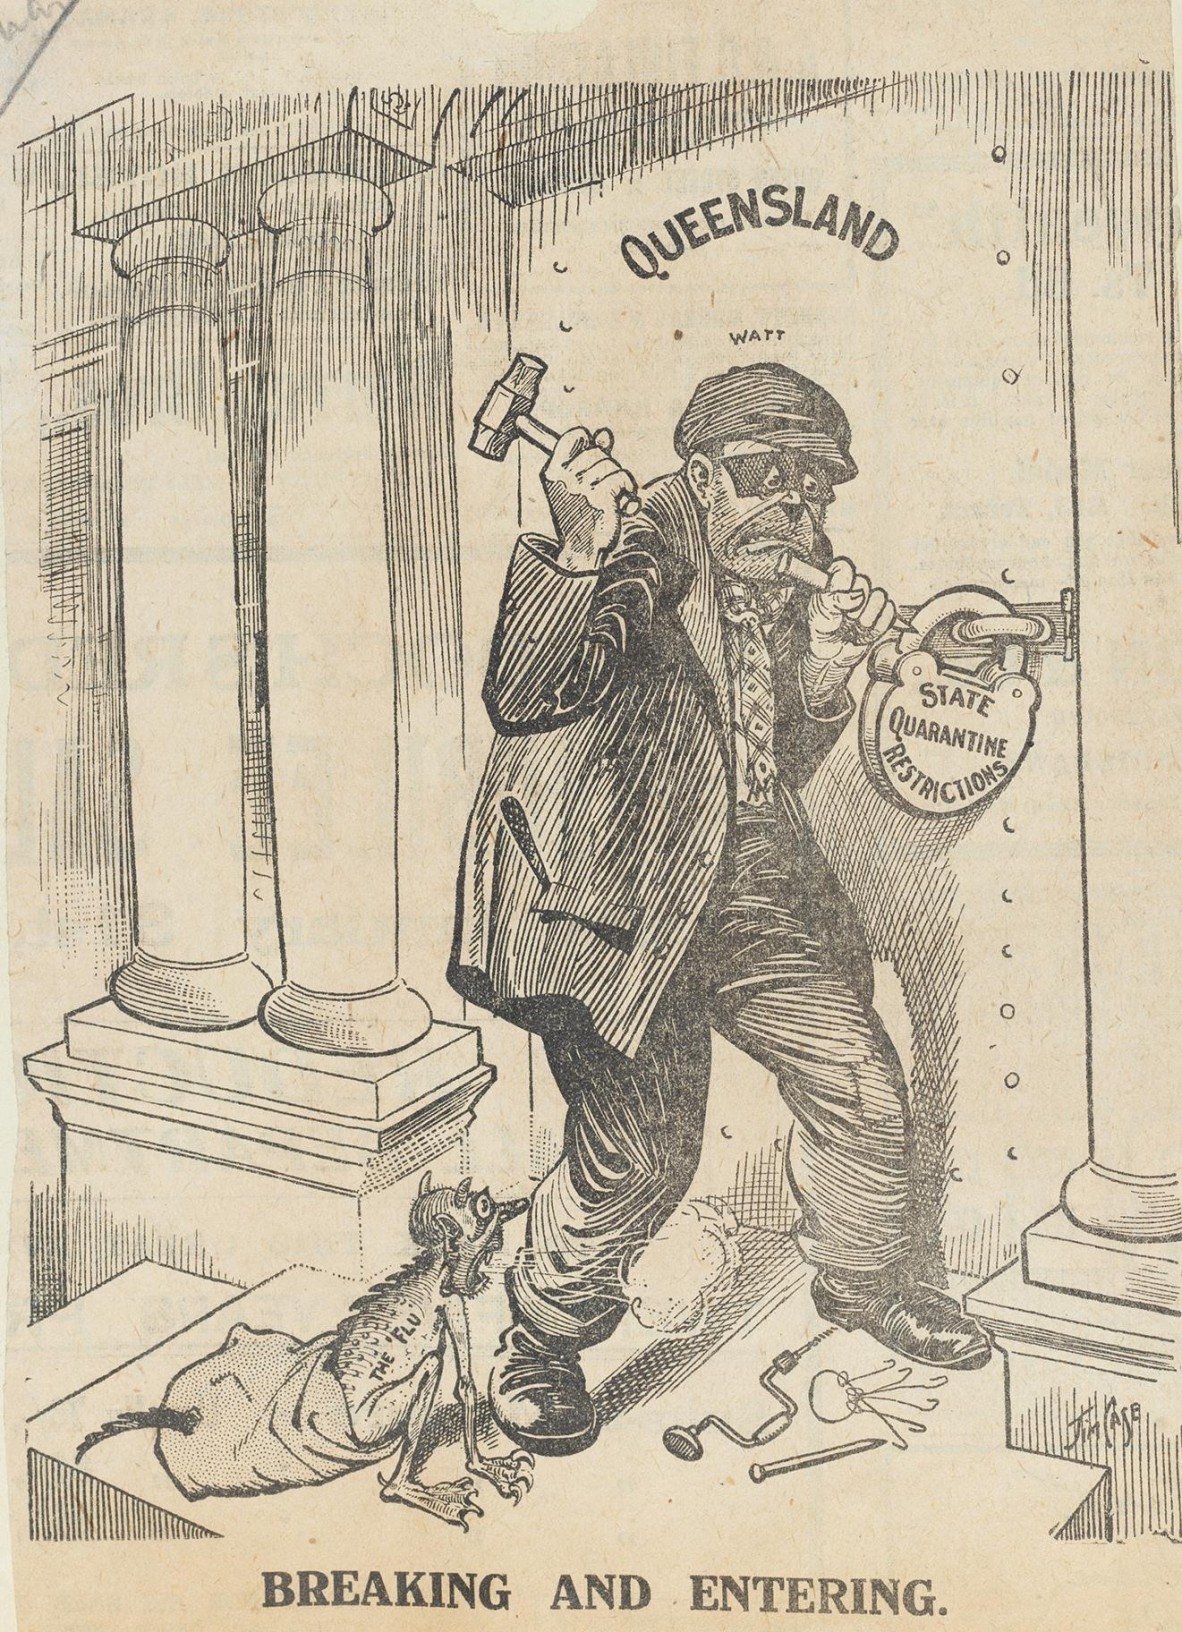 Cartoon of man with hammer and chisel trying to break the large lock on a heavy steel door with Queensland written on it